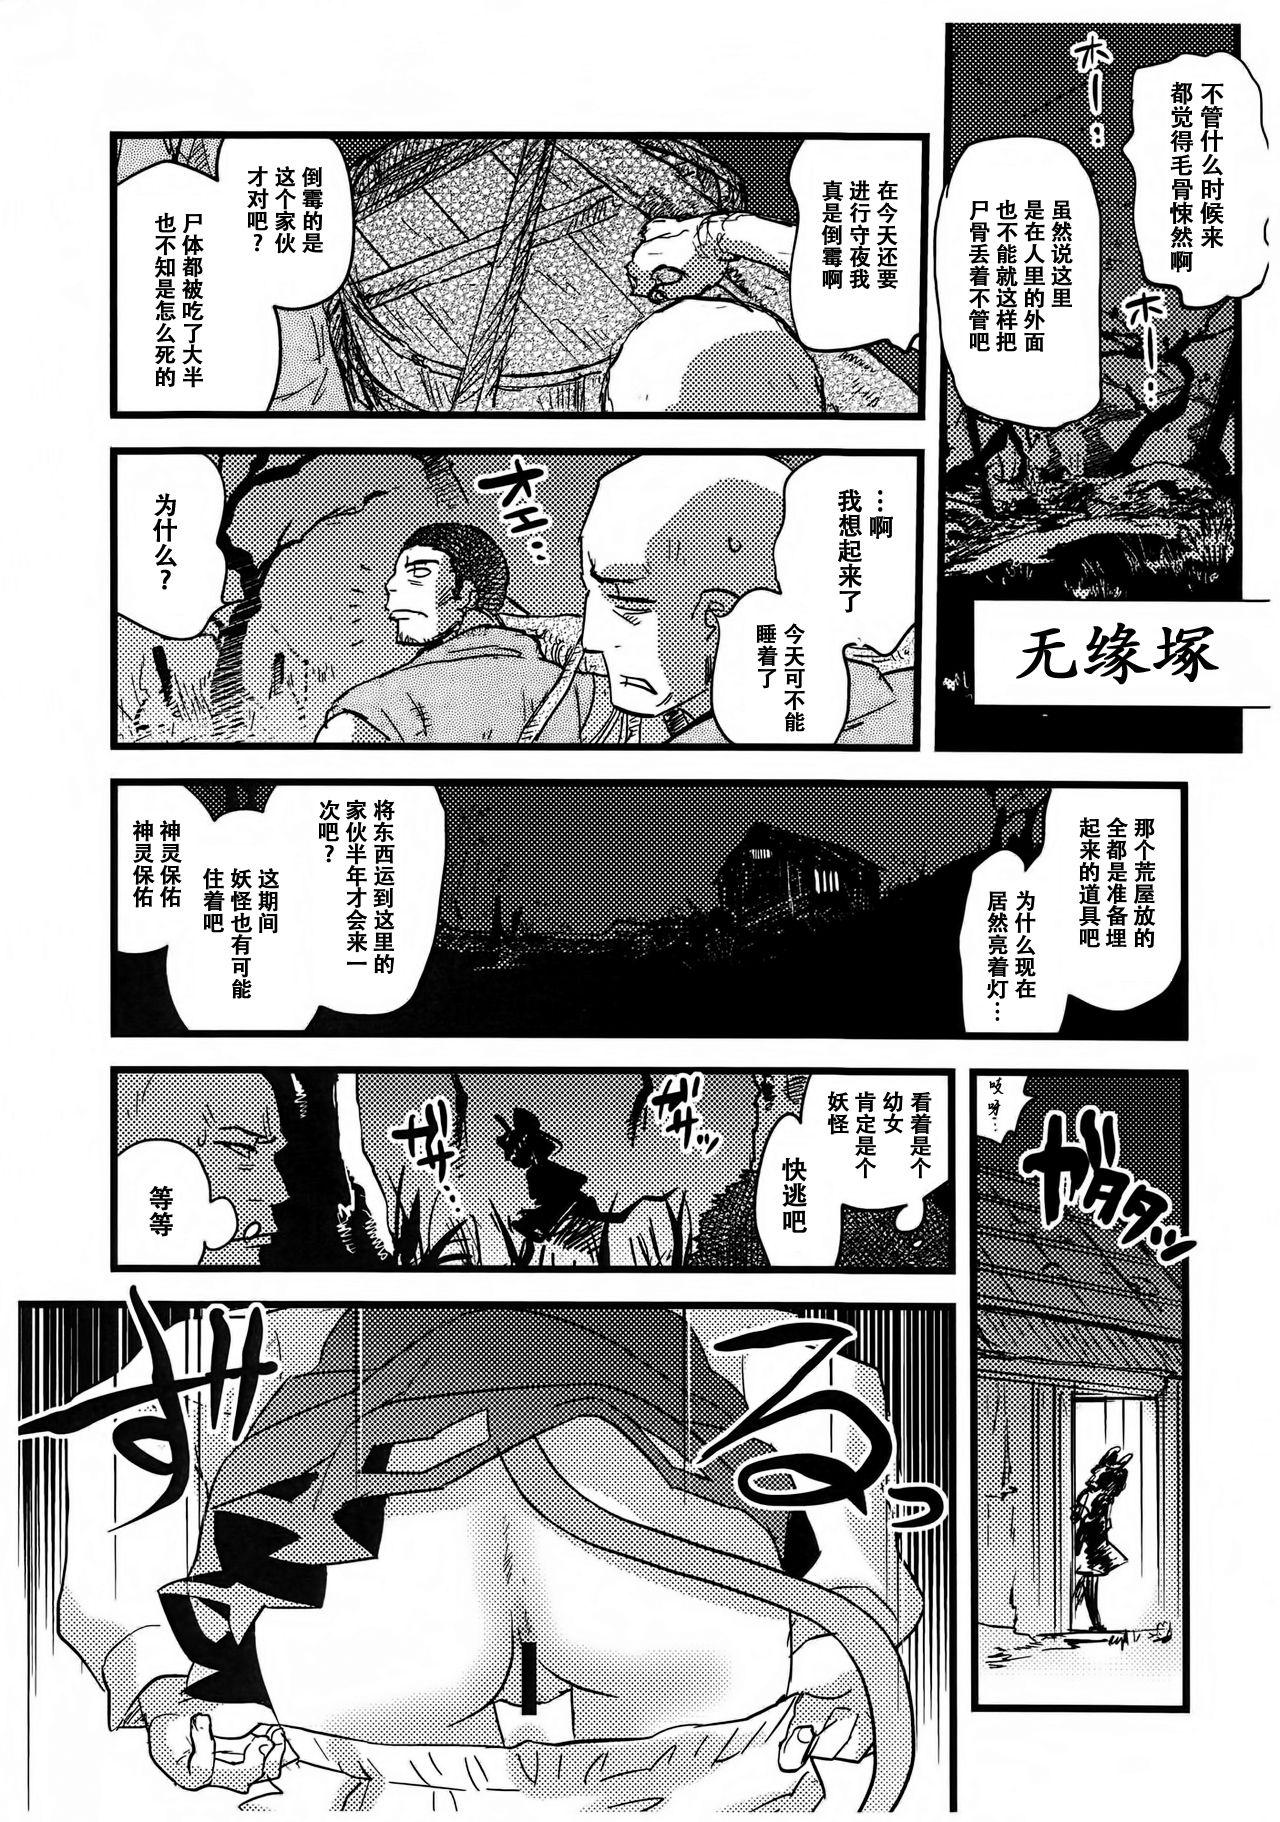 Hot Girl Pussy Nazrin Nakayoshi Mamehon | 和娜兹玲友爱的袖珍本 - Touhou project Rough Fuck - Page 3